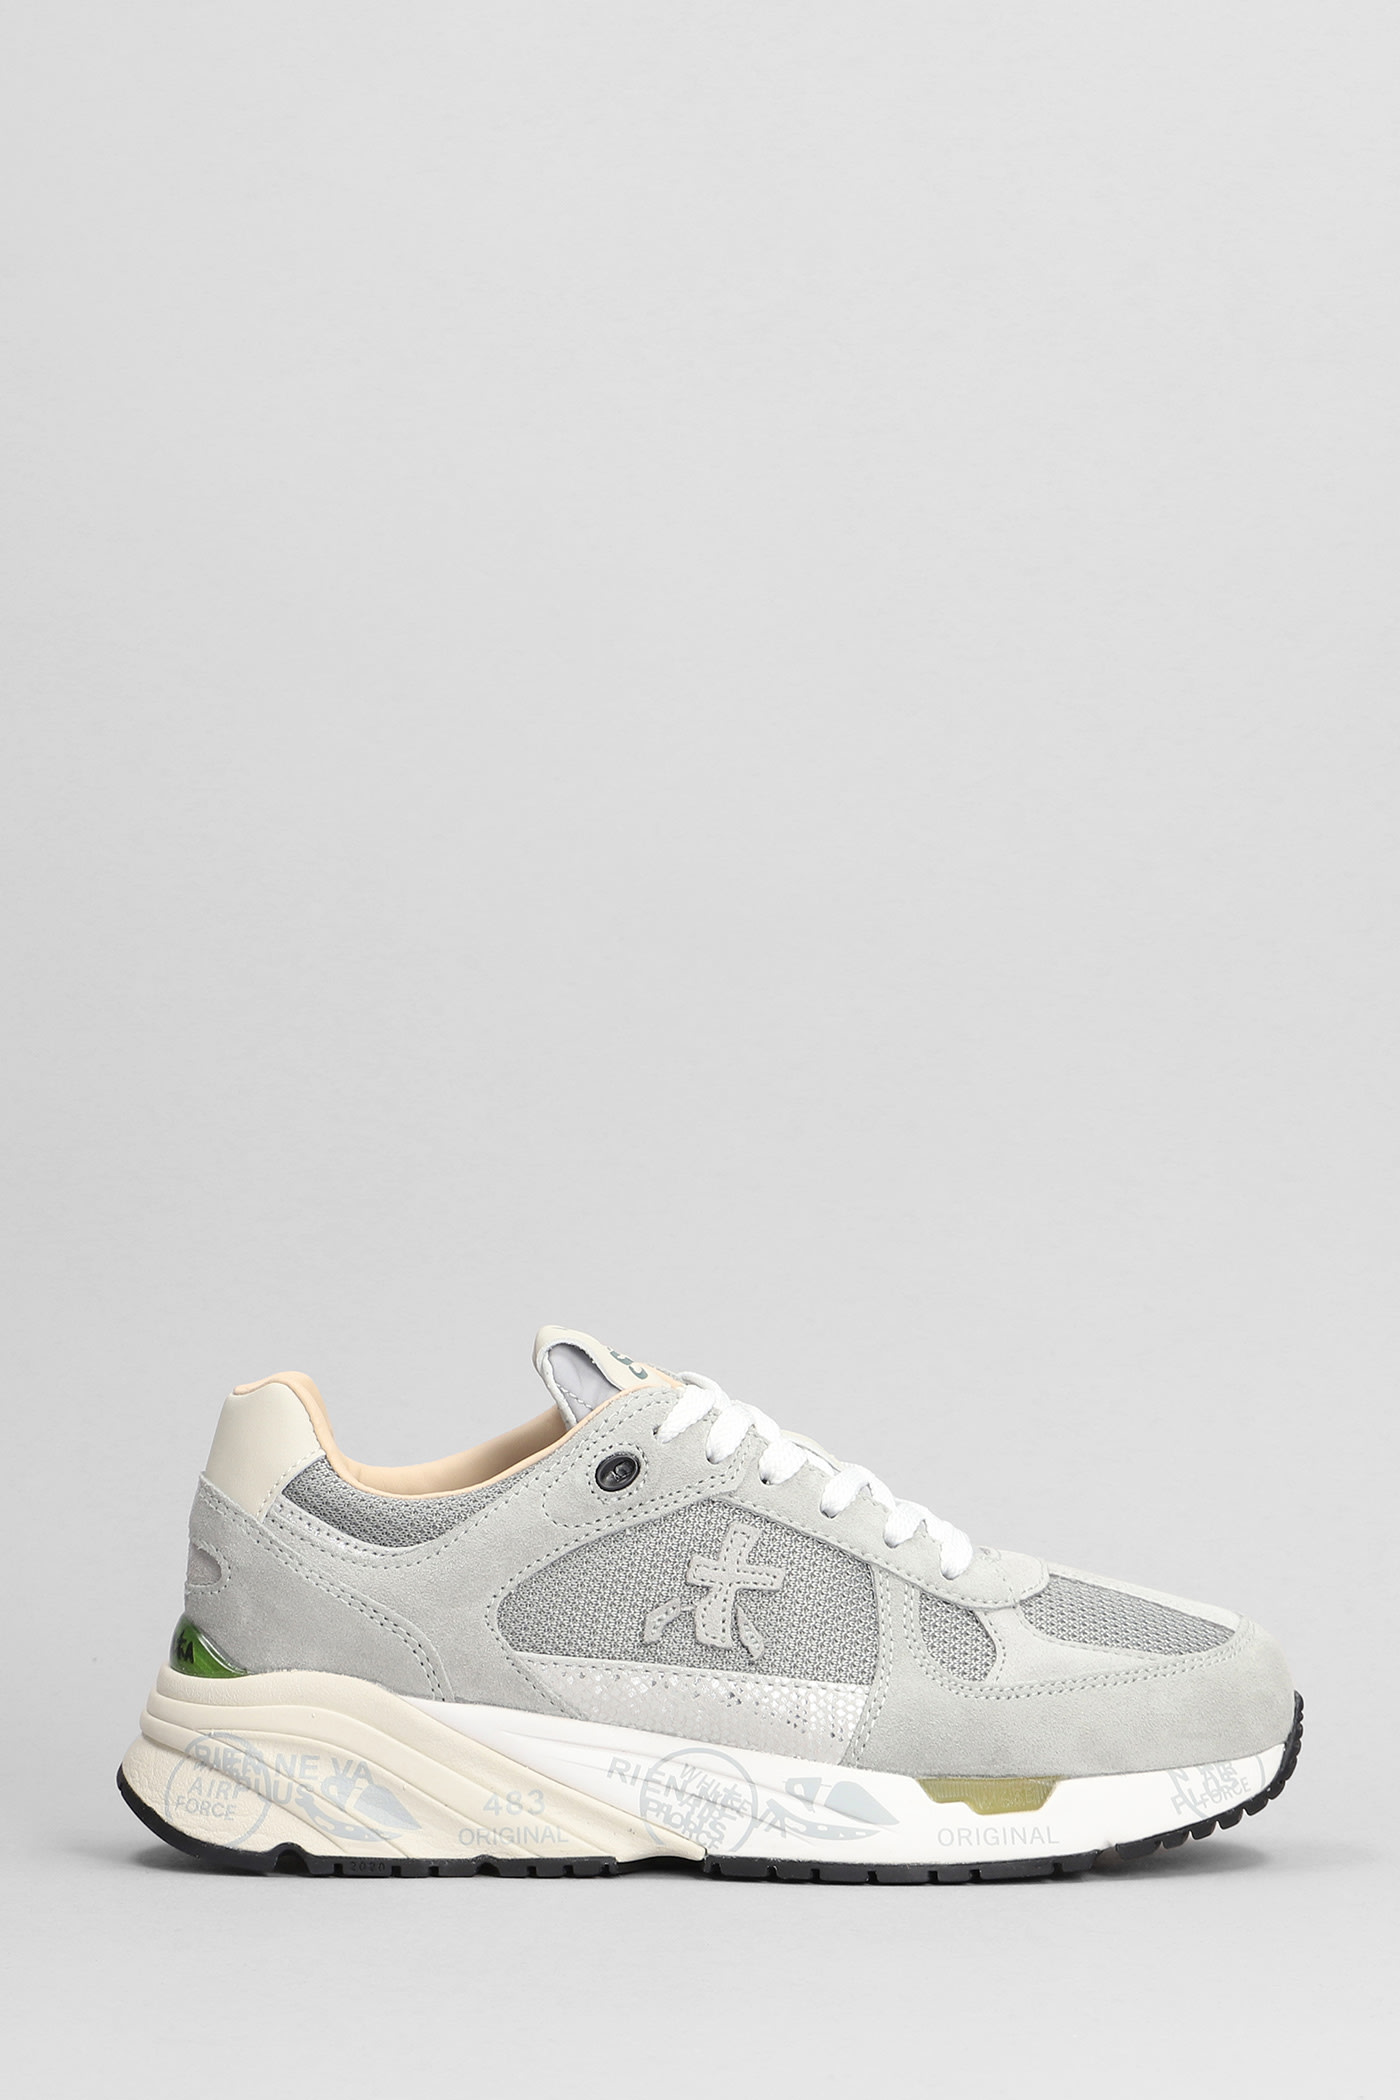 Premiata Mase Sneakers In Grey Suede And Fabric